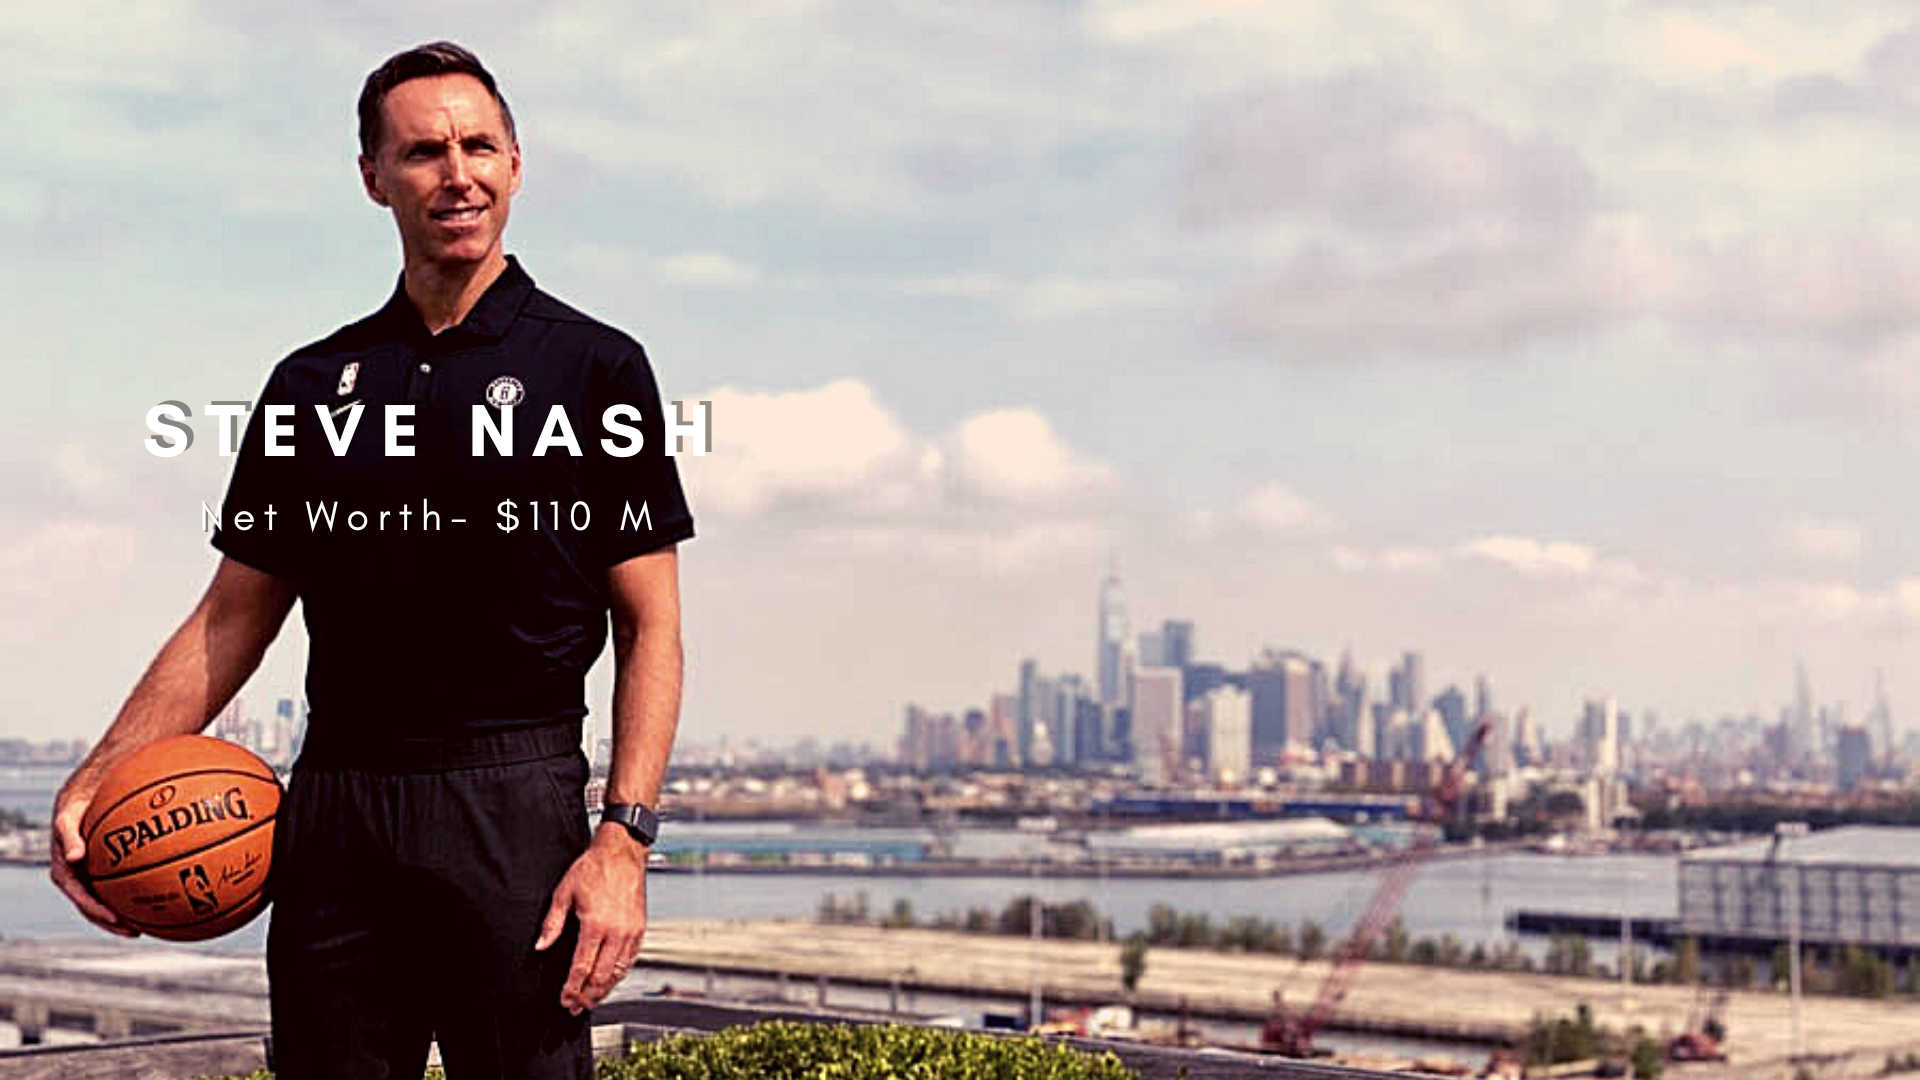 Steve Nash 2022 - Net Worth, Salary, Records, and Endorsements